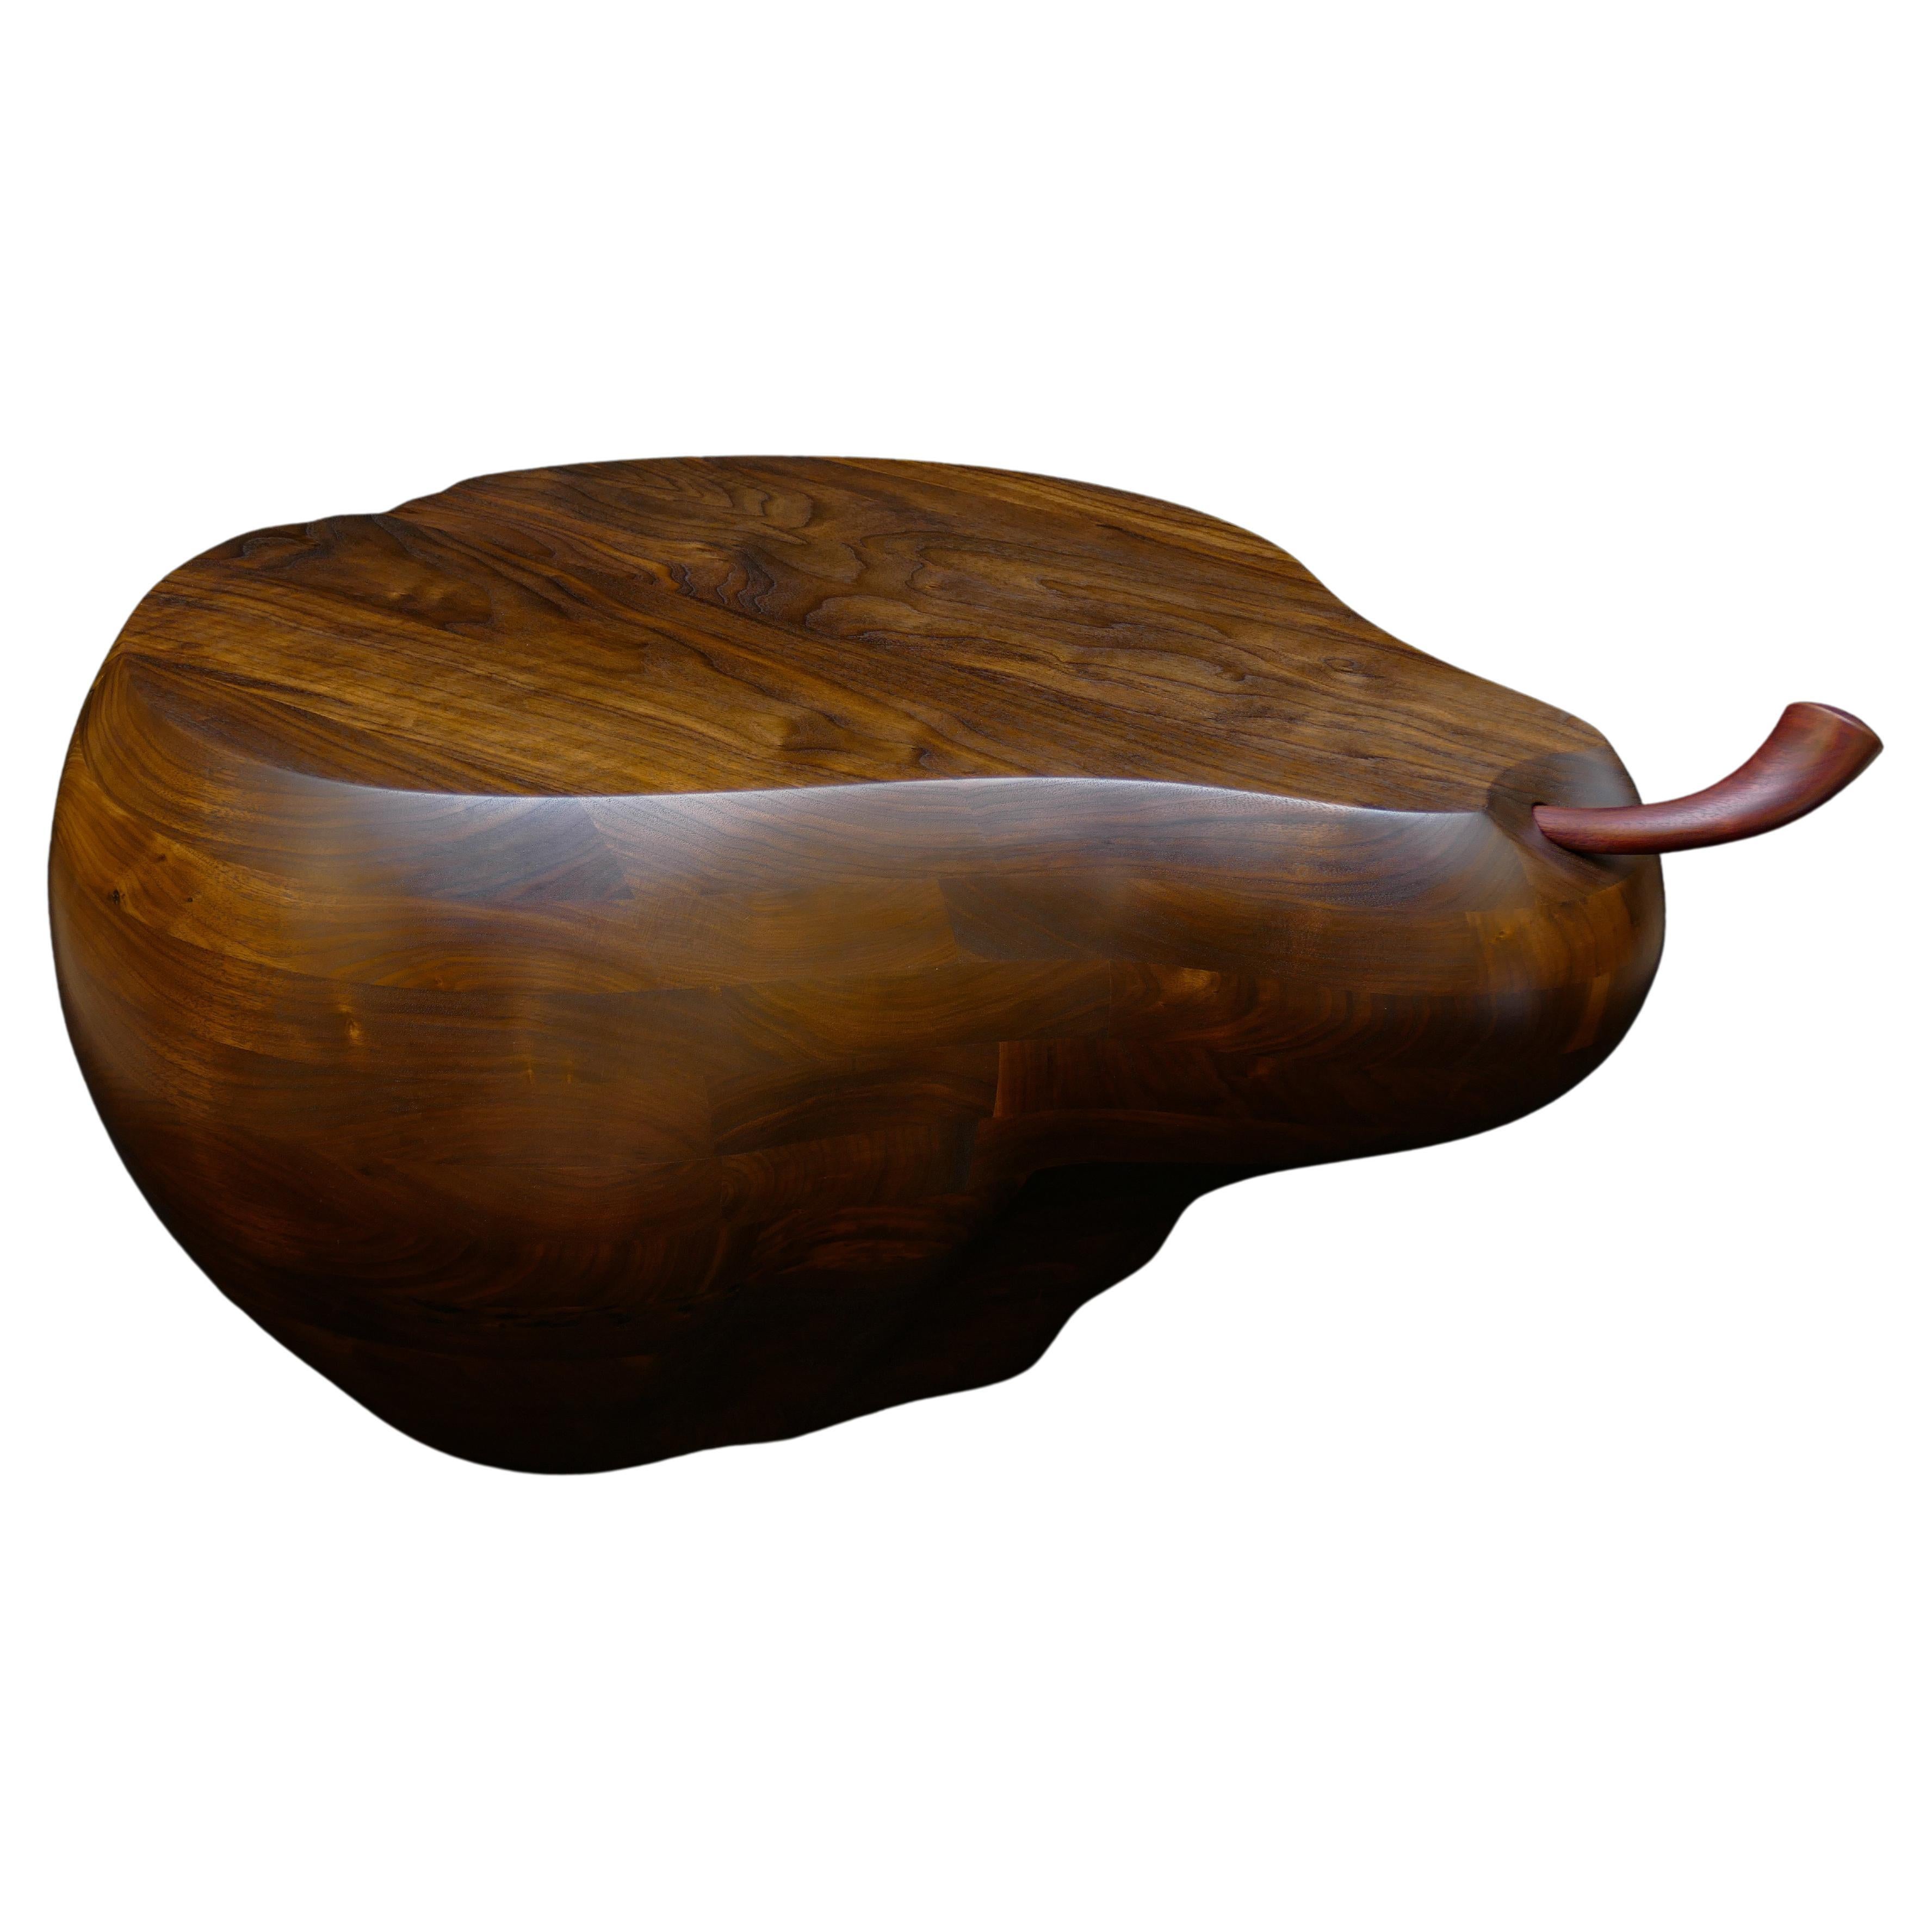 Voluptuous and ripe
The Opus Pear coffee table’s charm and beauty work in both modern and traditional settings for residential or commercial settings.

The Opus Pear coffee table is part of the Fruit Series and continues the artist’s fascination